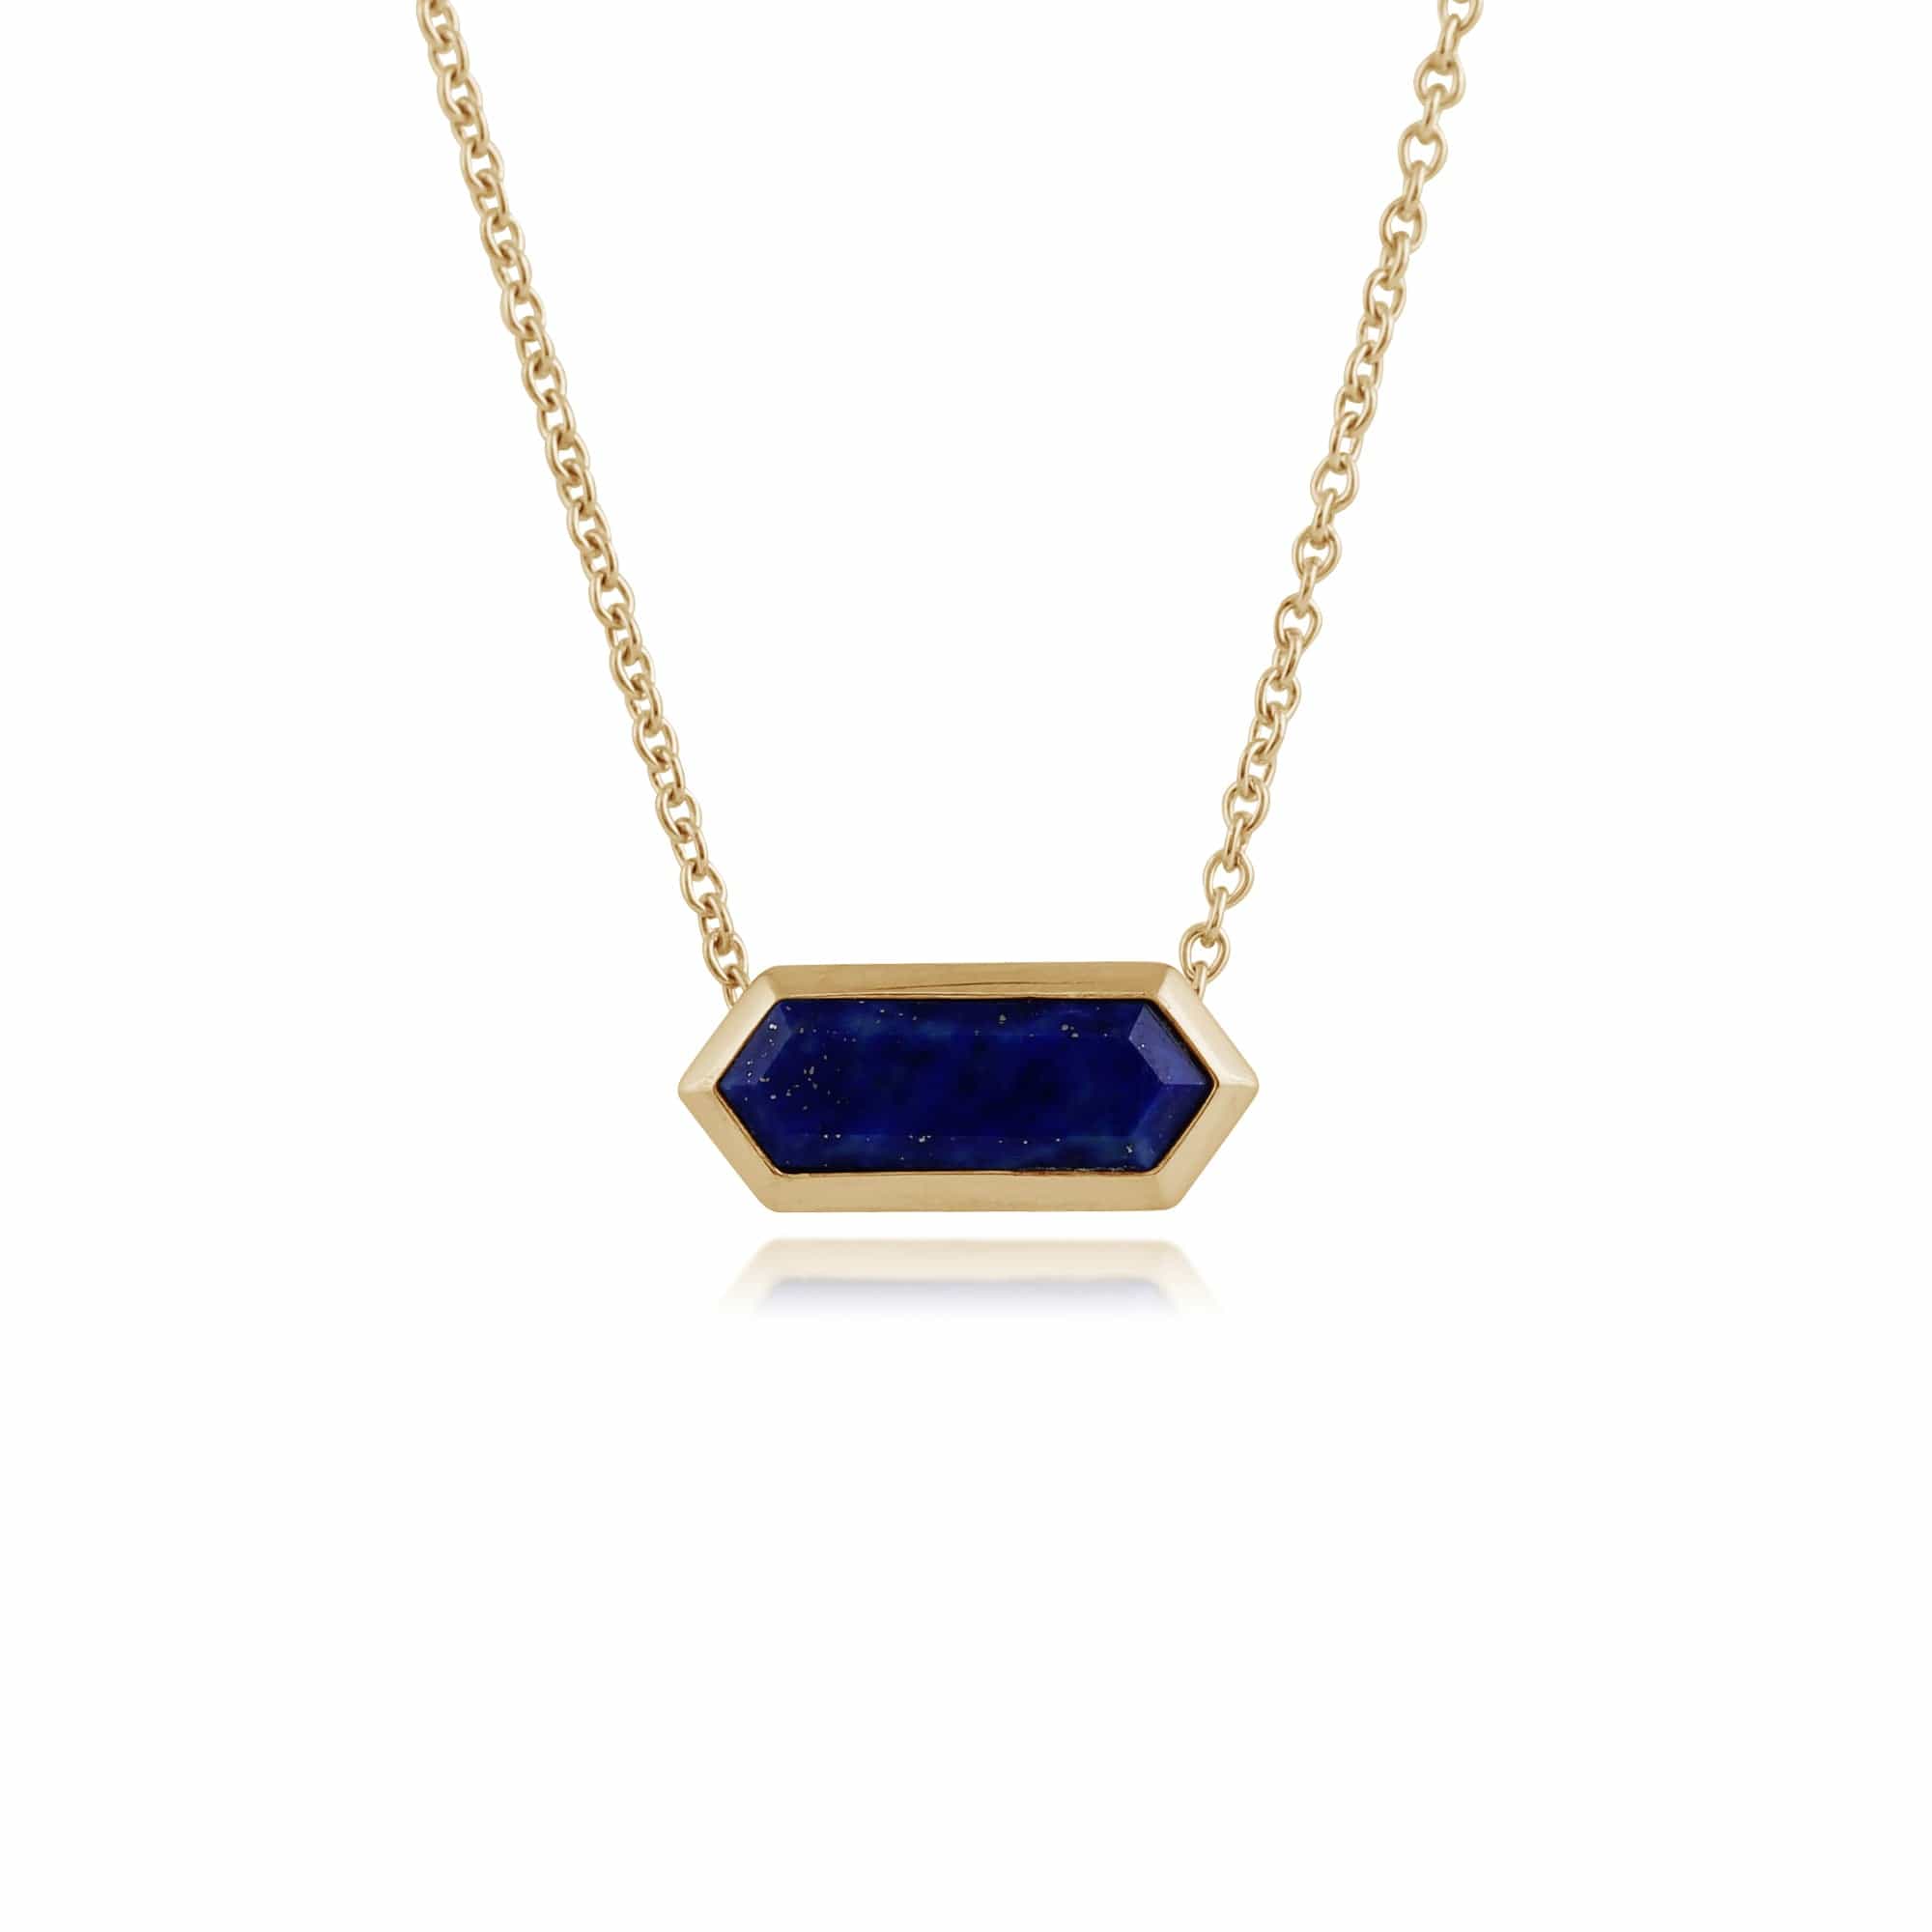 Geometric Hexagon Lapis Lazuli Prism Necklace in Gold Plated  Silver